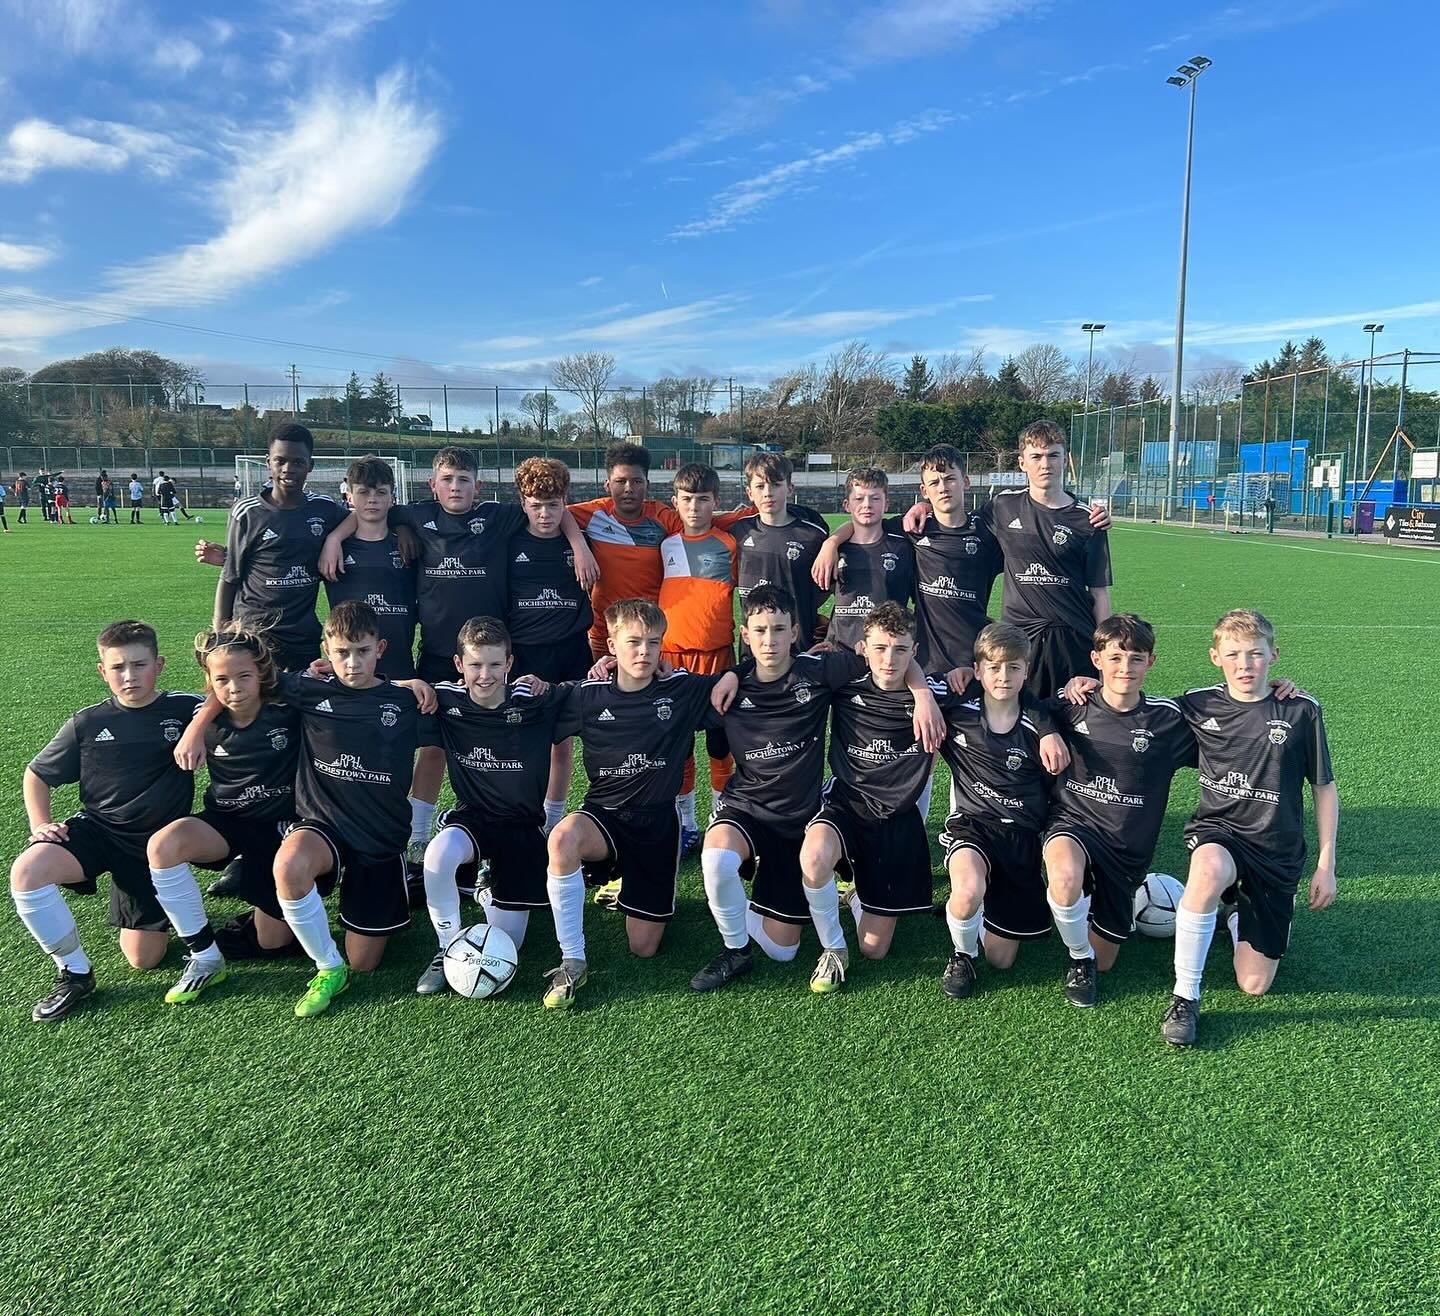 Well done to our 1st year soccer squad who have qualified for the Munster cup semi final with an excellent win V Newport in UL today. Goals from Fionn O Flaherty and a last minute winner from Tom Mulconroy ⚽️ ⚽️